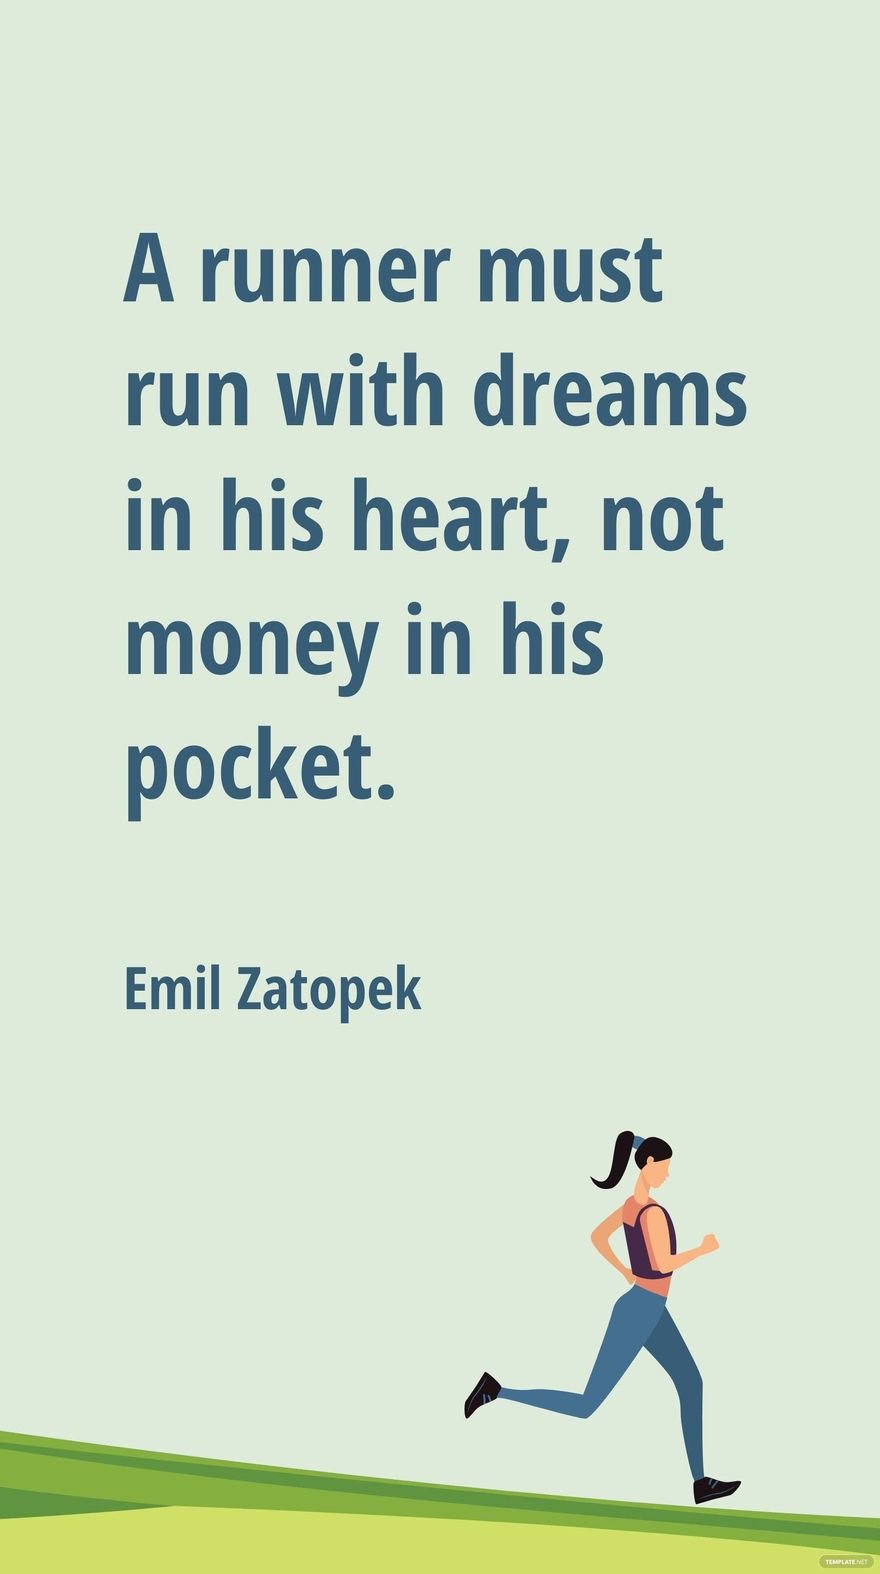 Free Emil Zatopek - A runner must run with dreams in his heart, not money in his pocket. in JPG